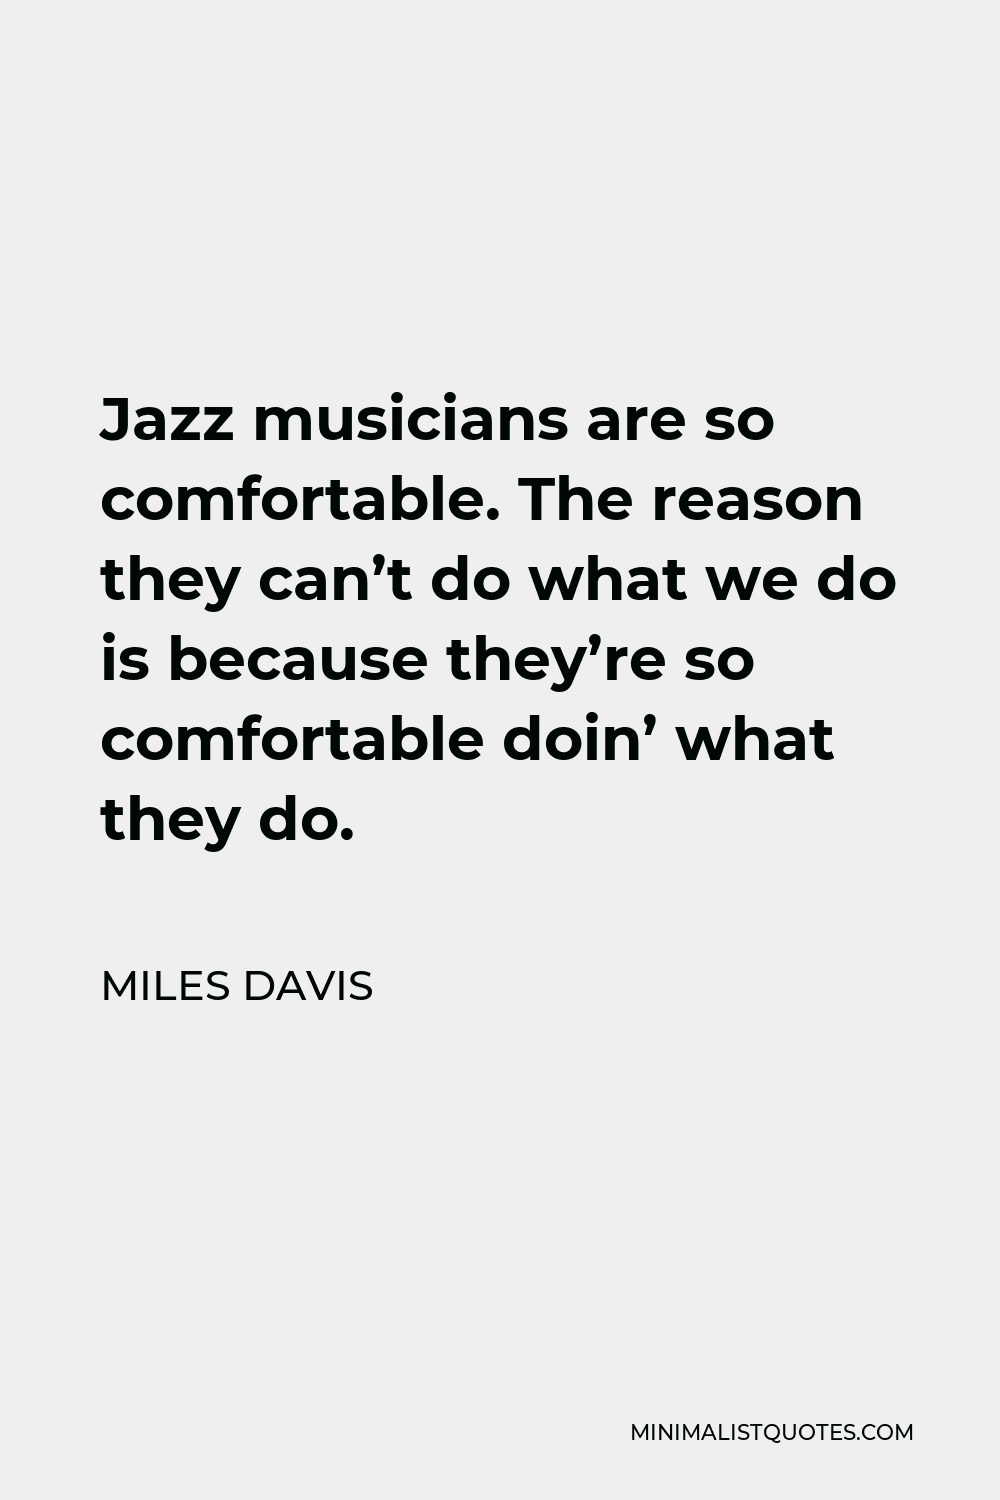 Miles Davis Quote - Jazz musicians are so comfortable. The reason they can’t do what we do is because they’re so comfortable doin’ what they do.